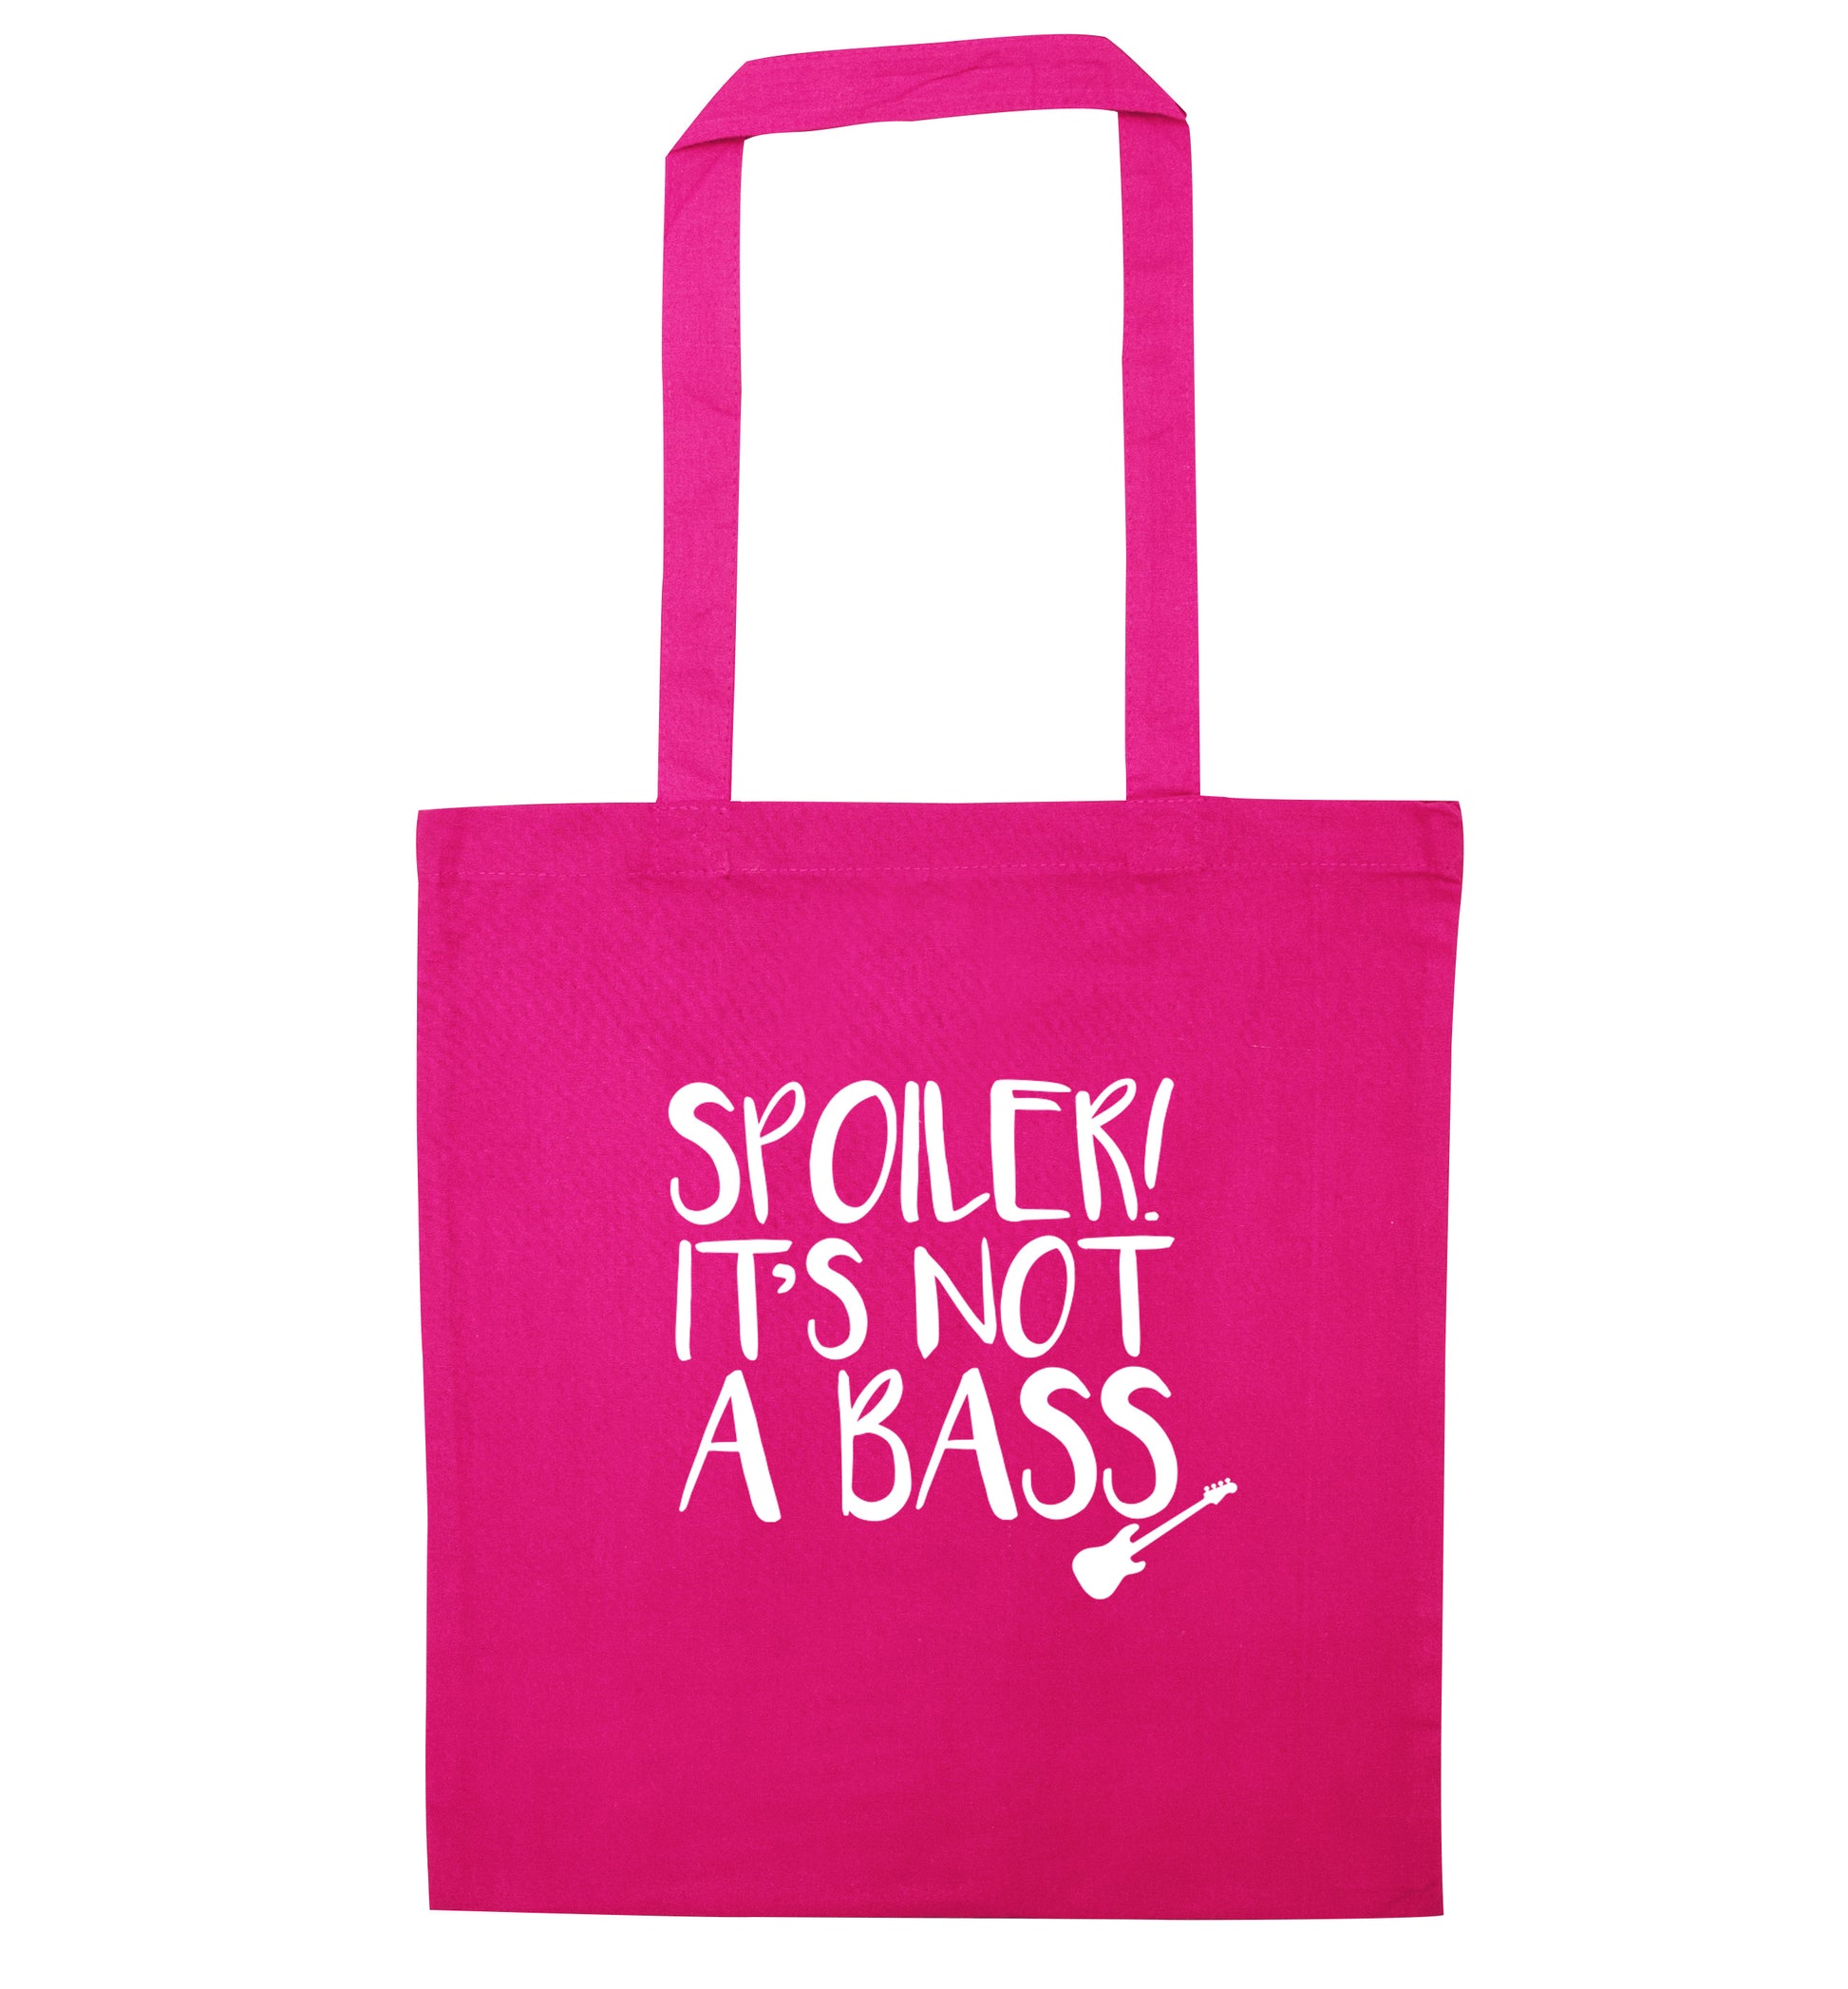 Spoiler it's not a bass pink tote bag